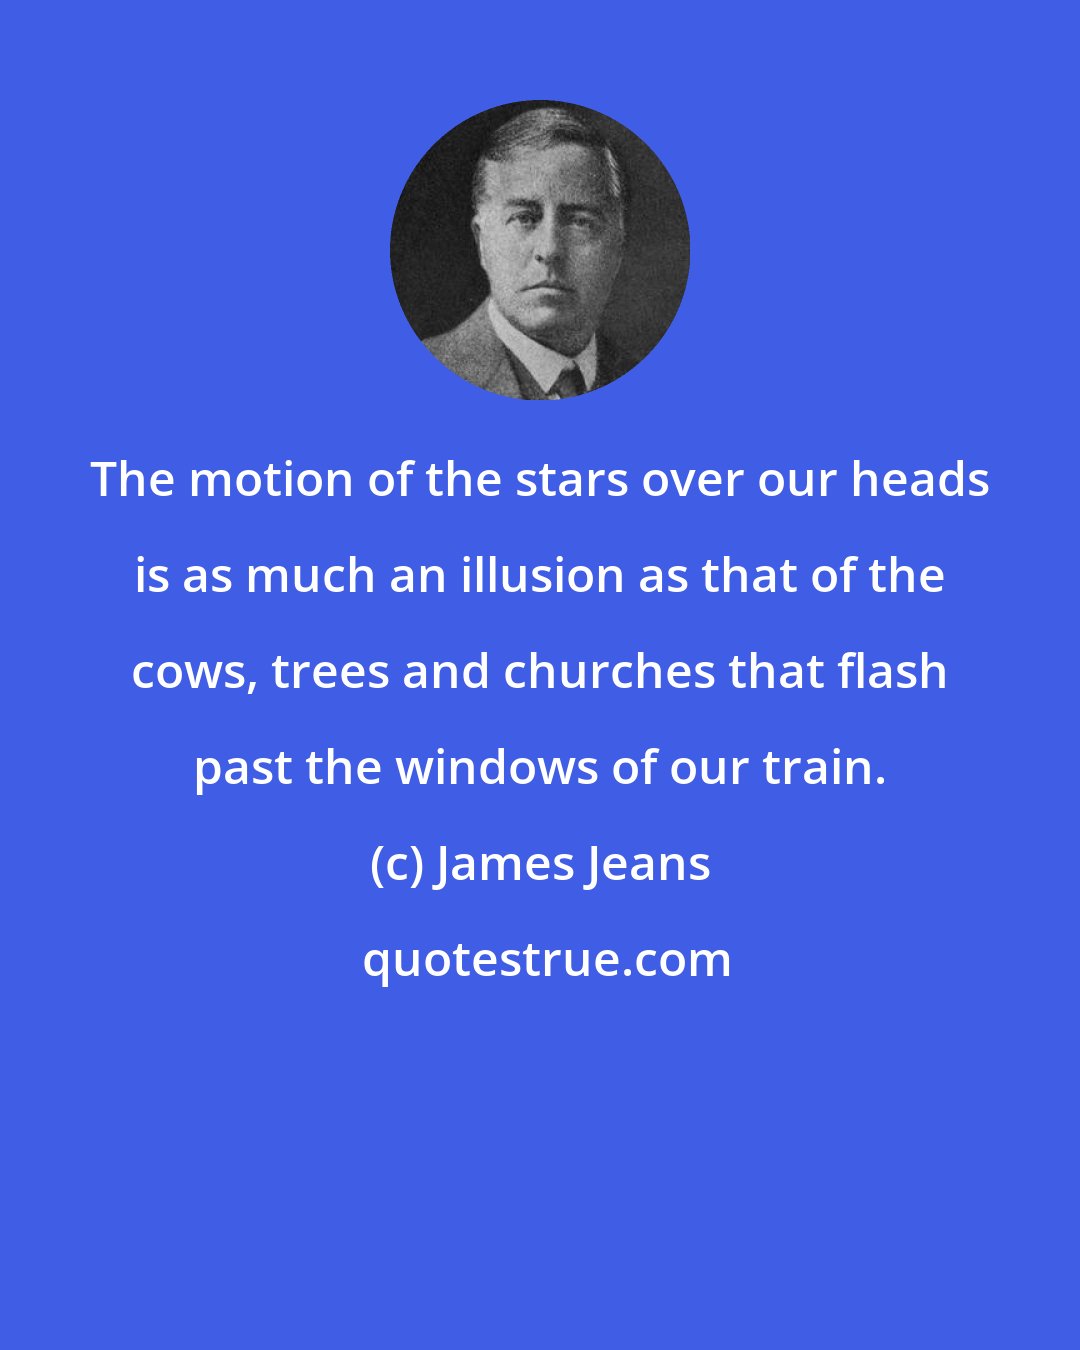 James Jeans: The motion of the stars over our heads is as much an illusion as that of the cows, trees and churches that flash past the windows of our train.